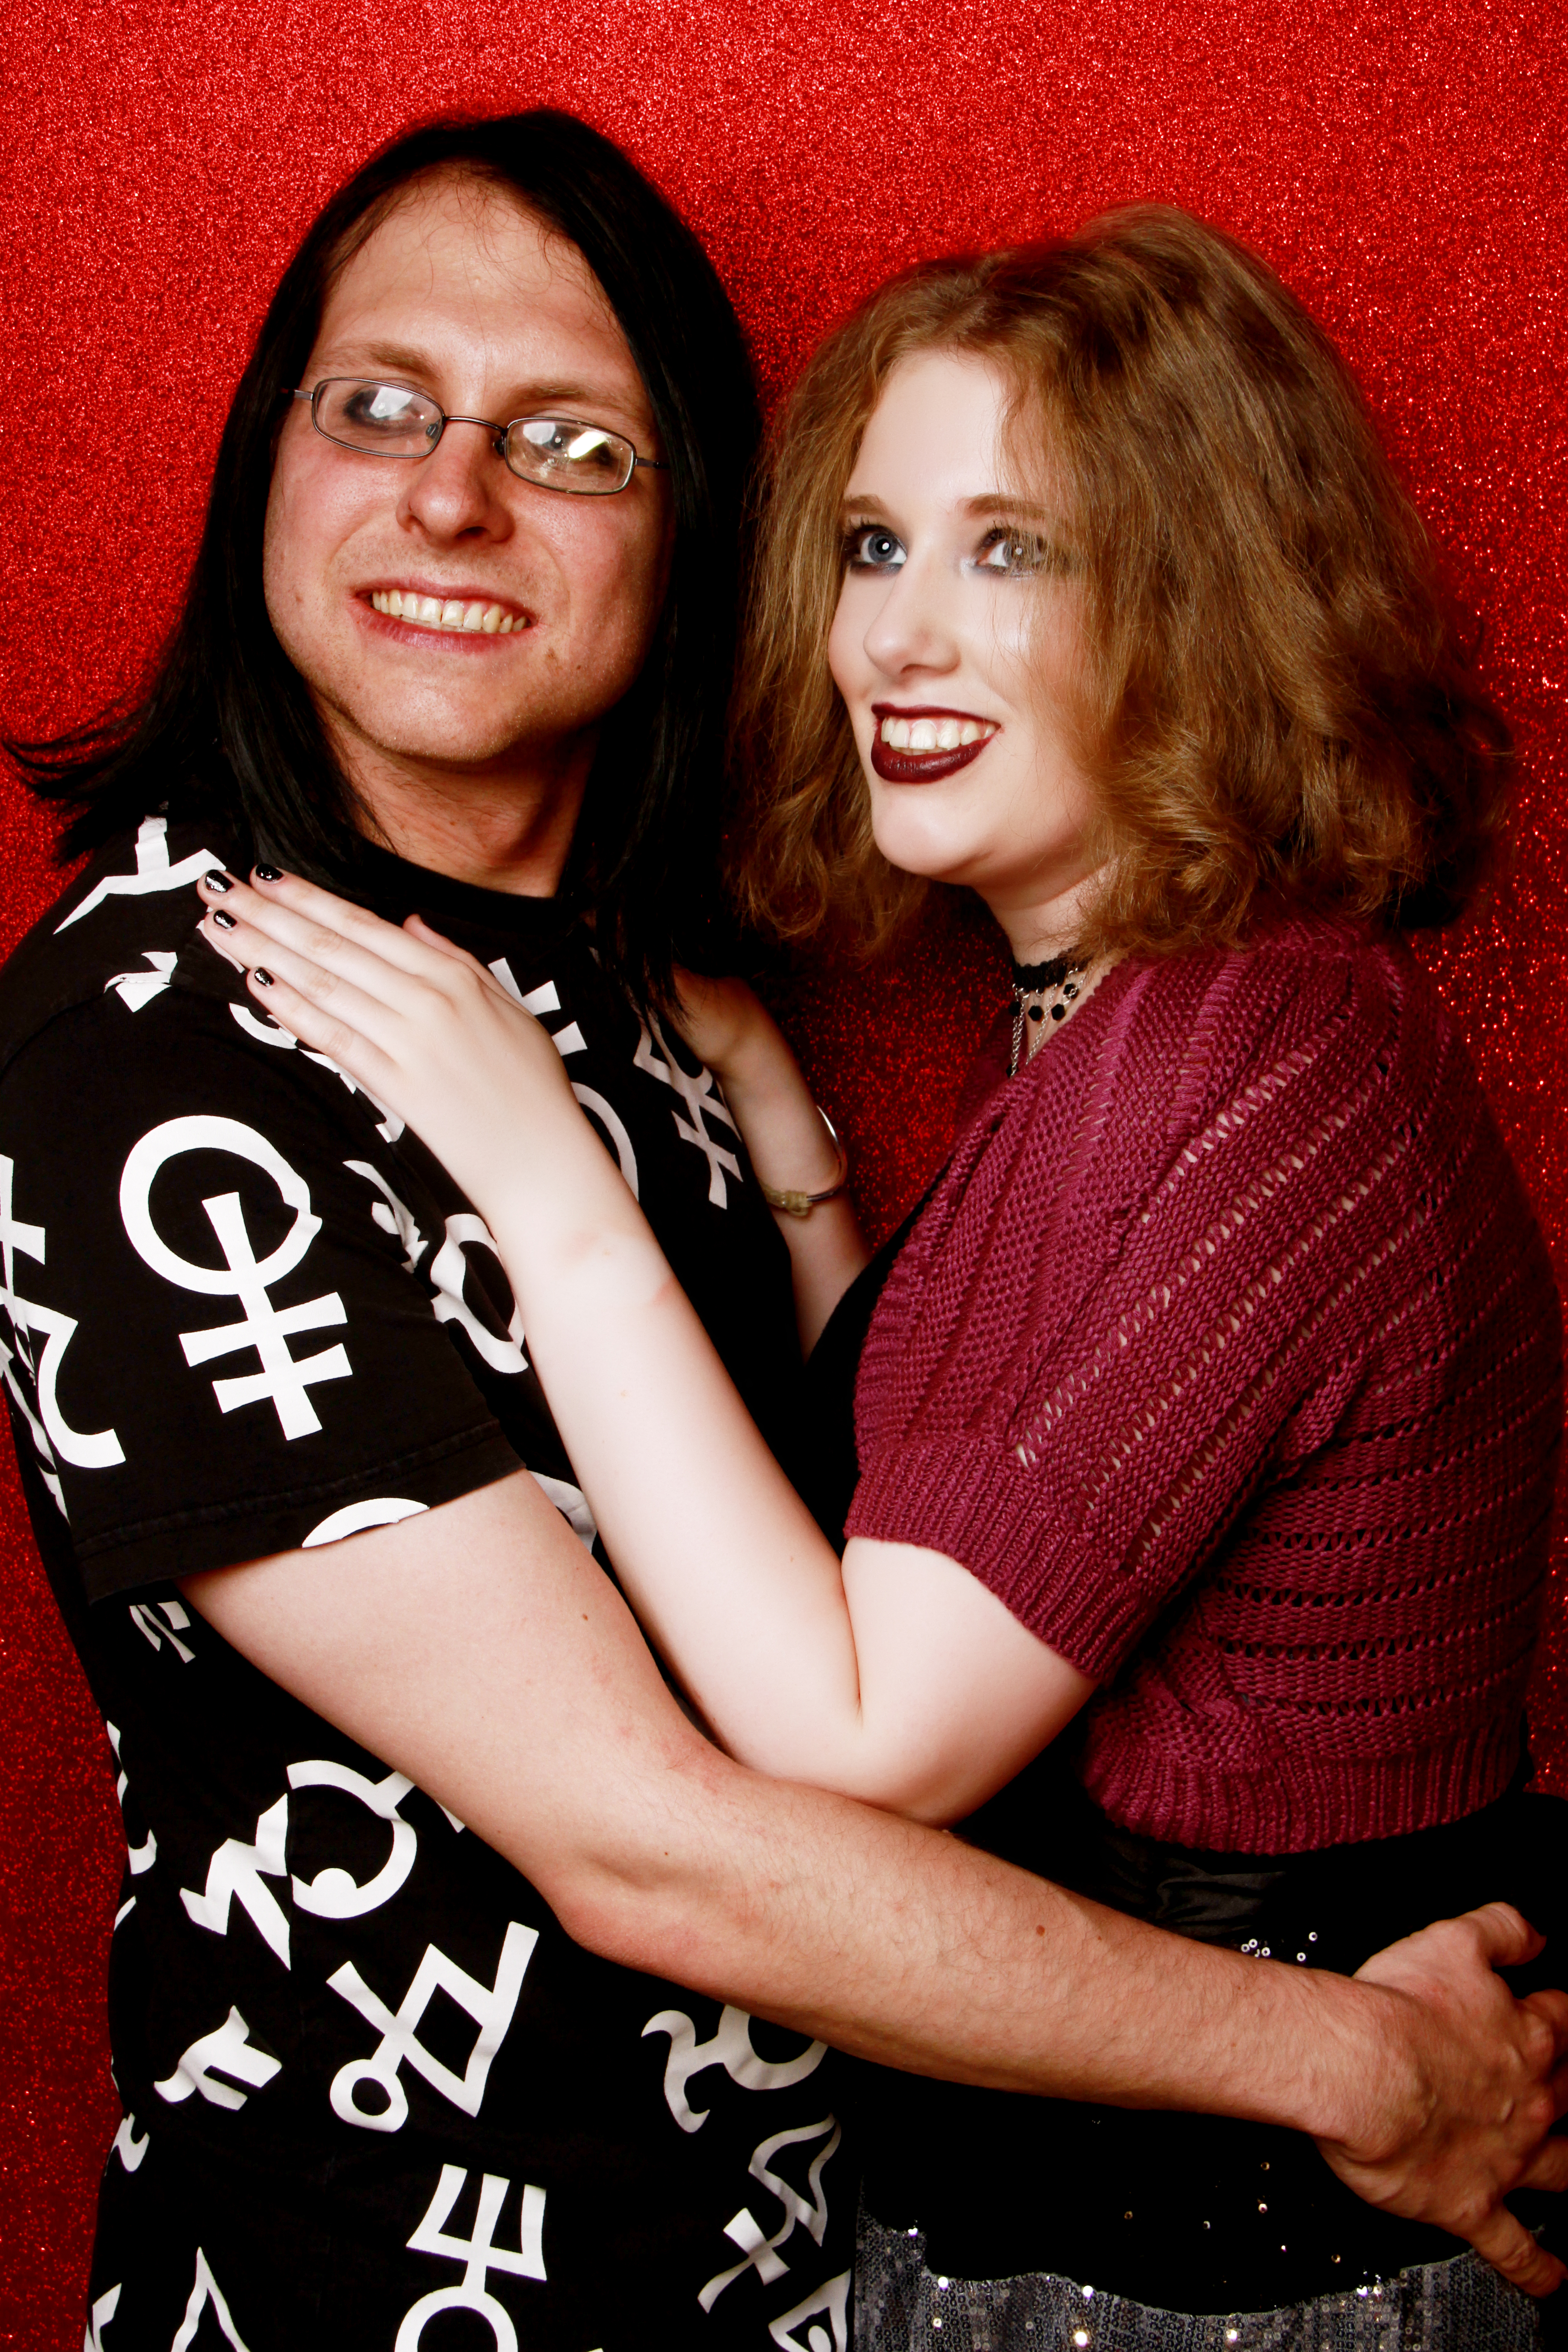 Image description: taken at a photo shoot. My husband and me are stood side-on to the camera, bodies facing each other but looking towards the camera. My hands are on his shoulders. I'm wearing my purple cardigan, & a black dress with a silver sequined skirt. Jarred is wearing a black t-shirt covered in occult symbols.